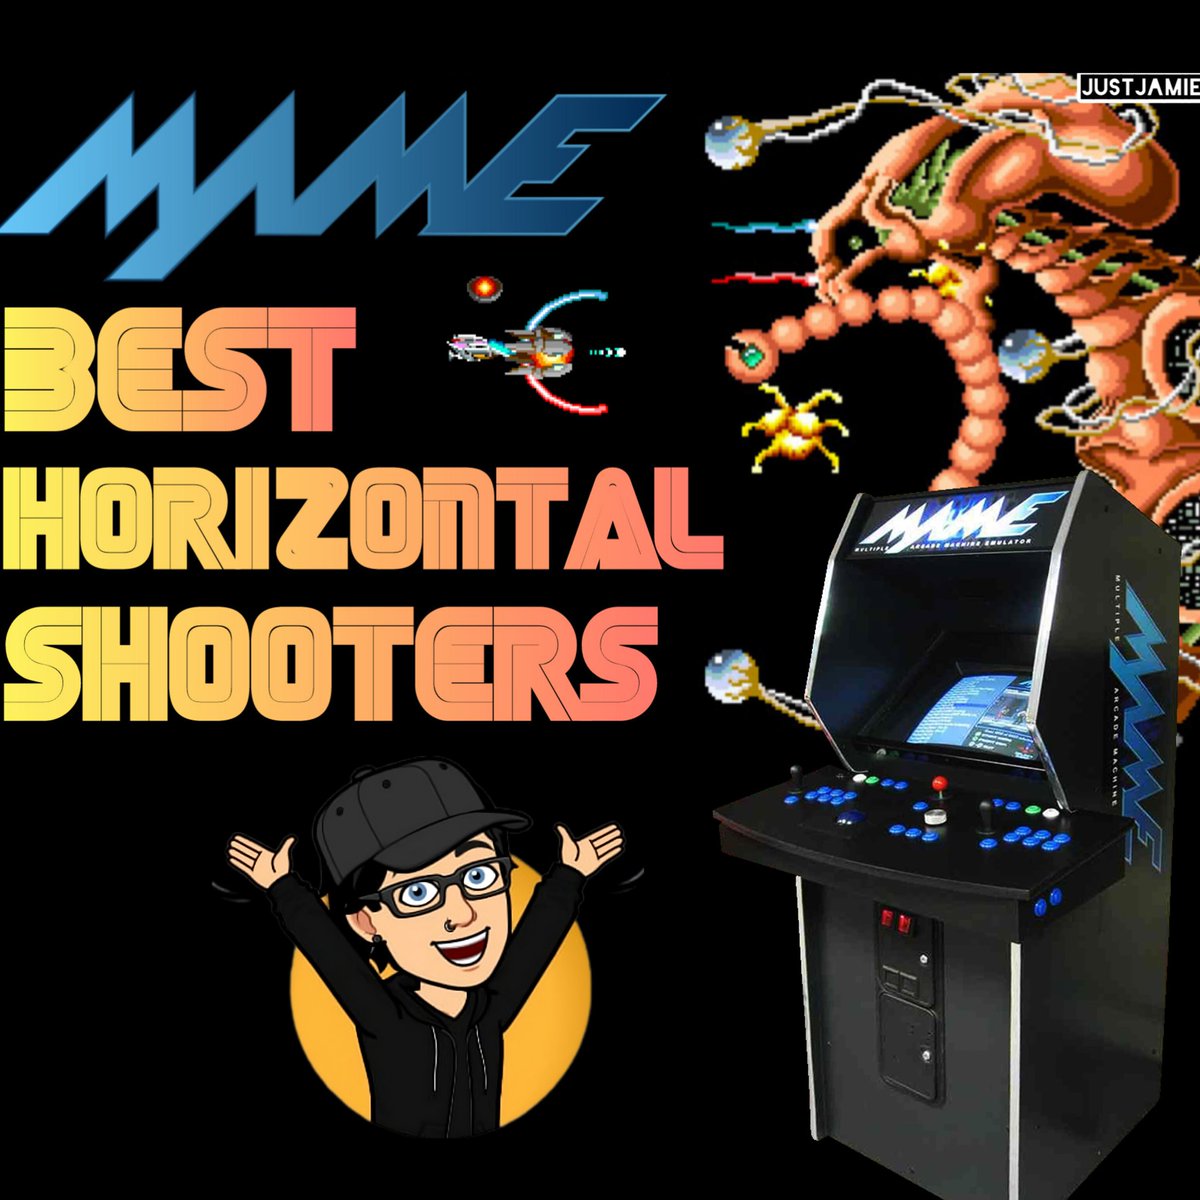 This is my top 30 personal favourite horizontal shooters for MAME. From arcade classics such as R-Type - Scramble. There is a lot here to potentially discover. youtu.be/7t10B8O2IXE?si… #MAME #arcadegames #arcadegaming #retrogaming #retrogames #justjamie